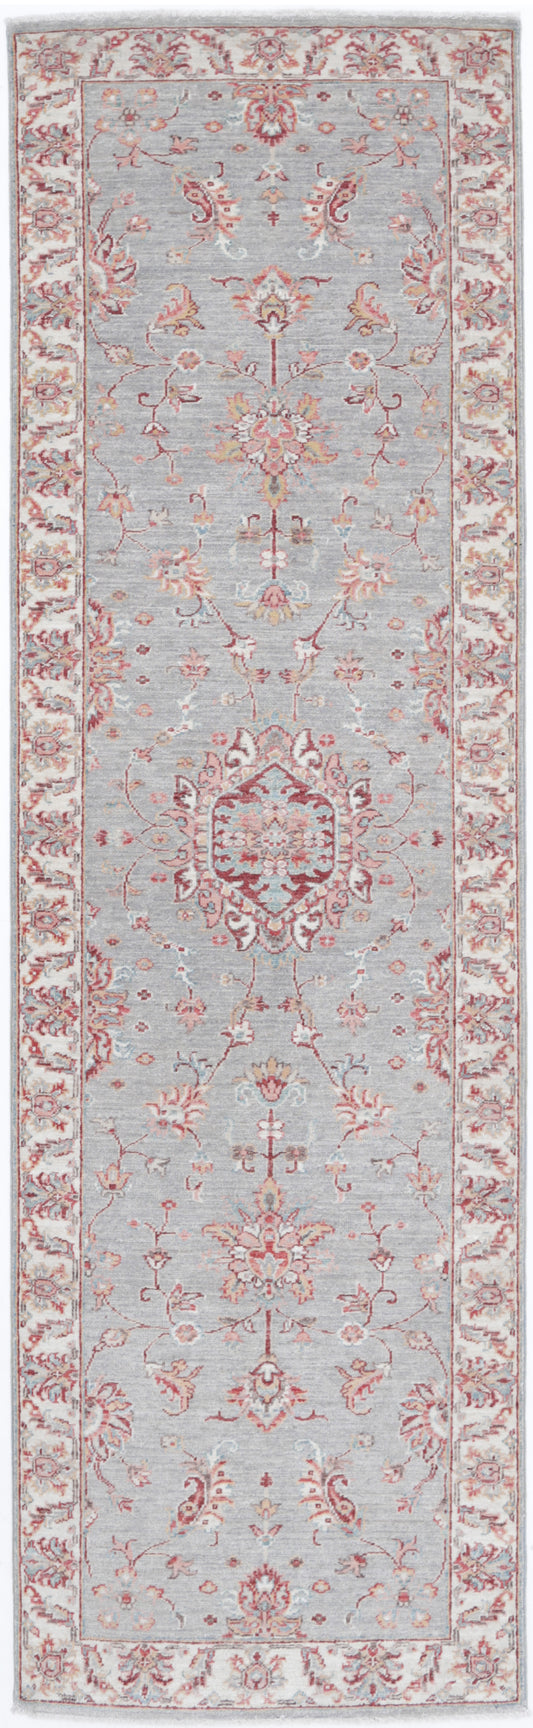 Traditional Hand Knotted Ziegler Farhan Wool Rug of Size 2'8'' X 9'8'' in Grey and Ivory Colors - Made in Afghanistan